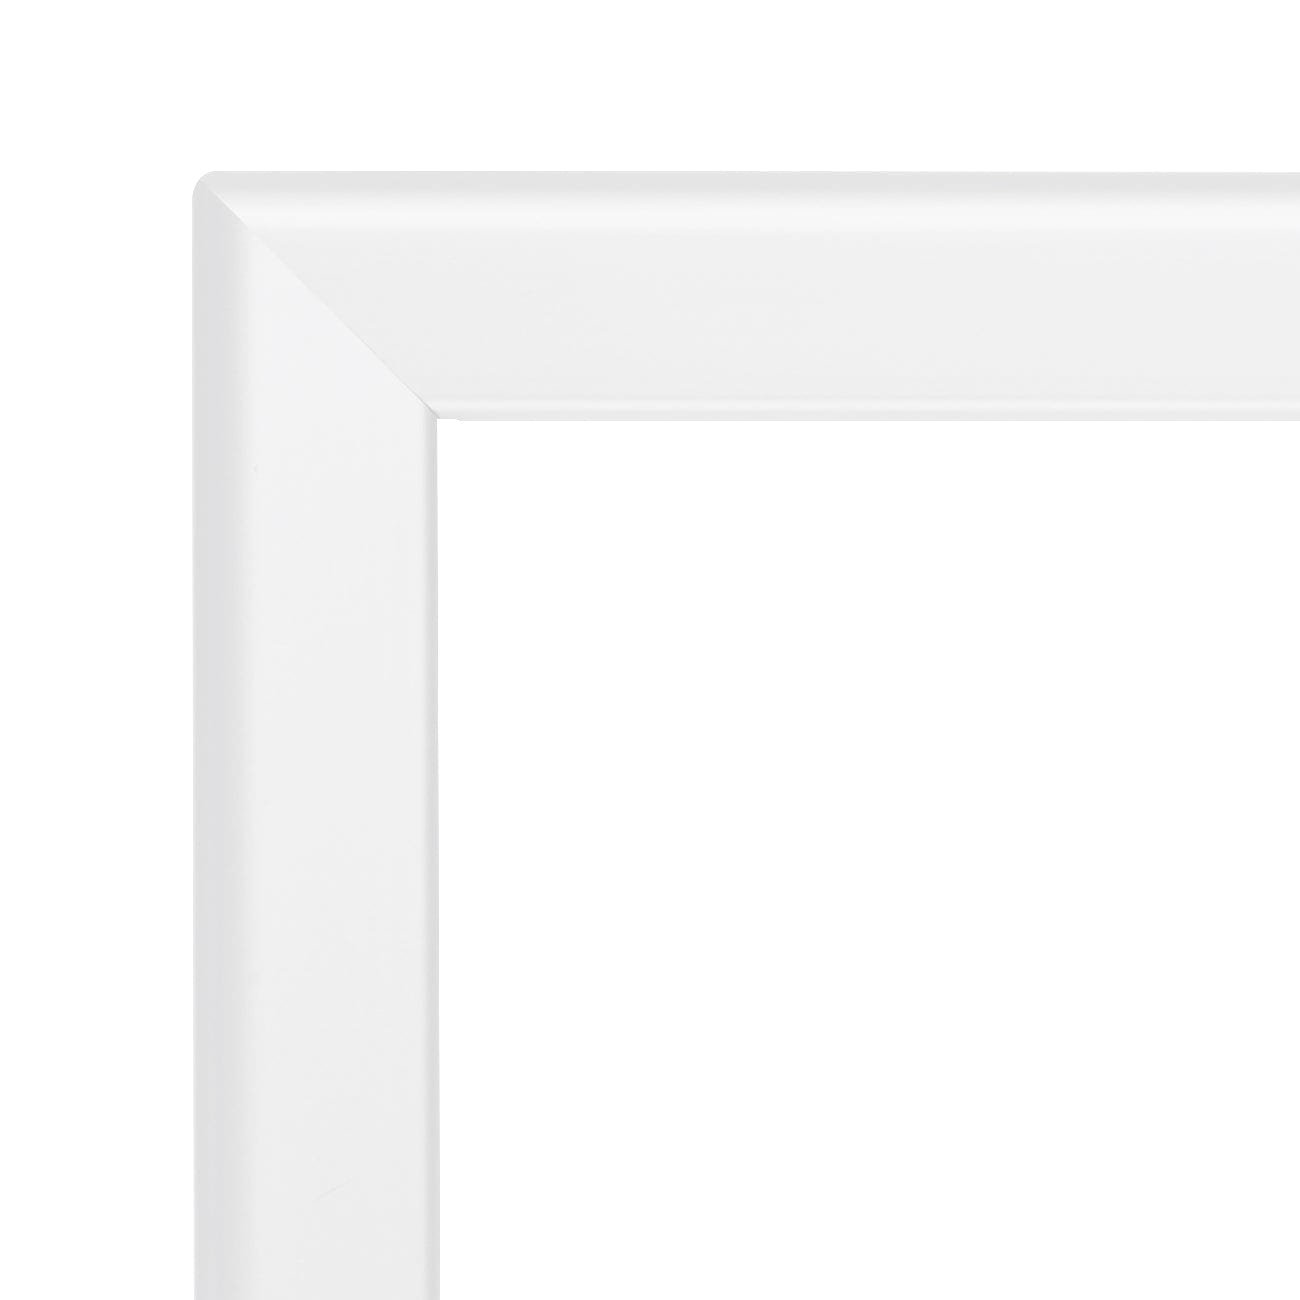 36x48 TRADEframe White Snap Frame 36x48 - 1.25 inch profile - Snap Frames Direct